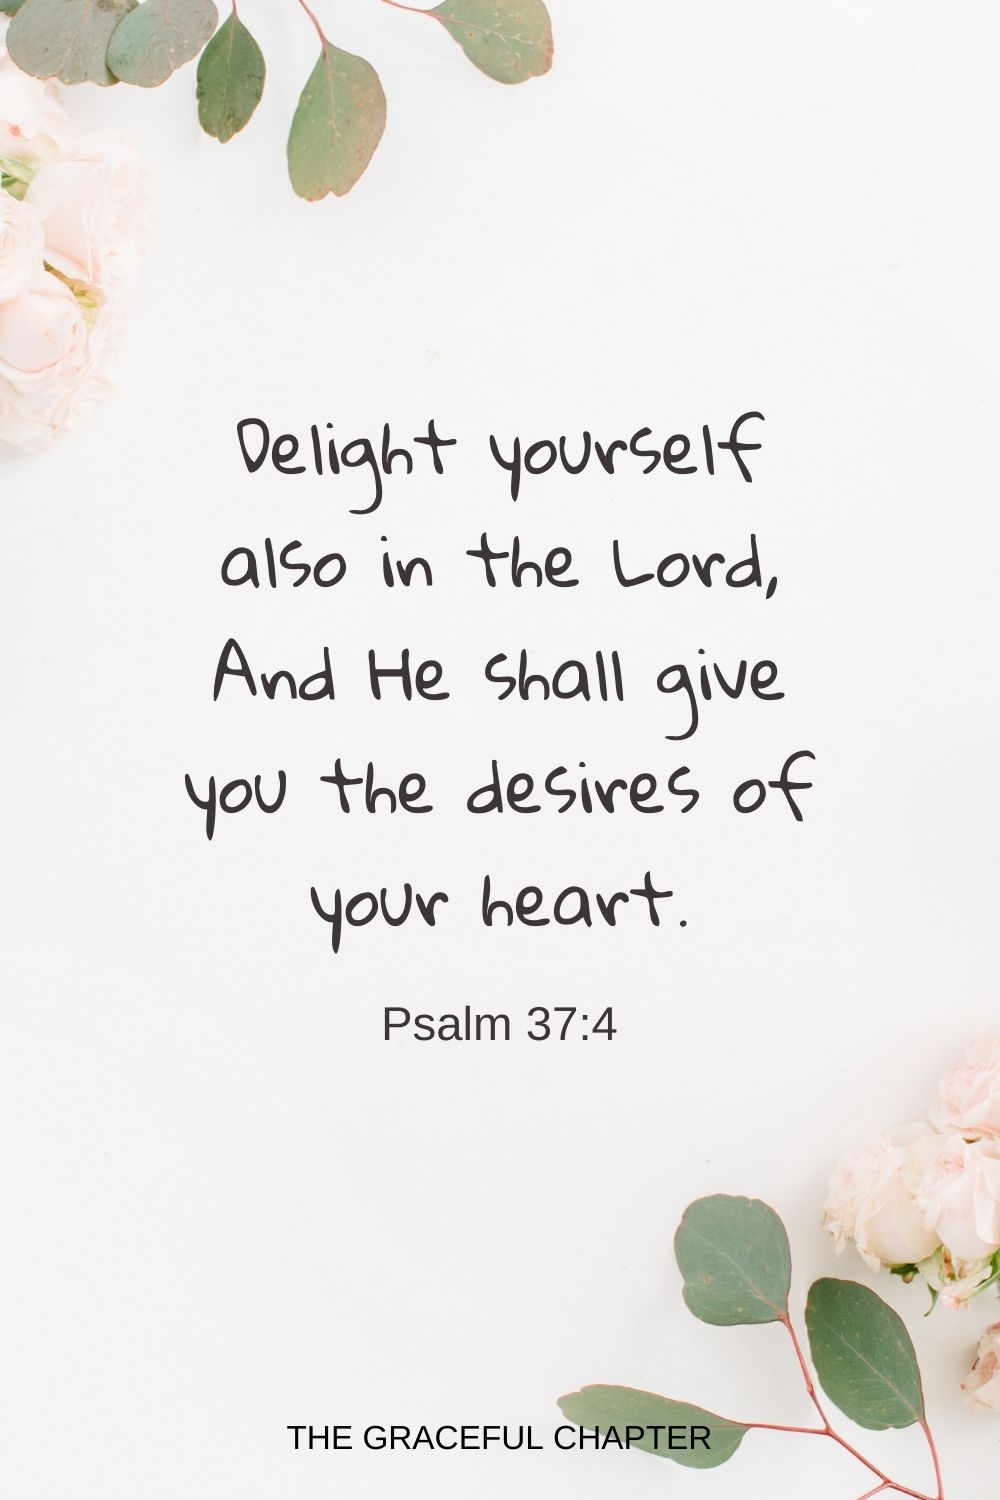 Delight yourself also in the Lord, And He shall give you the desires of your heart. Psalm 37:4